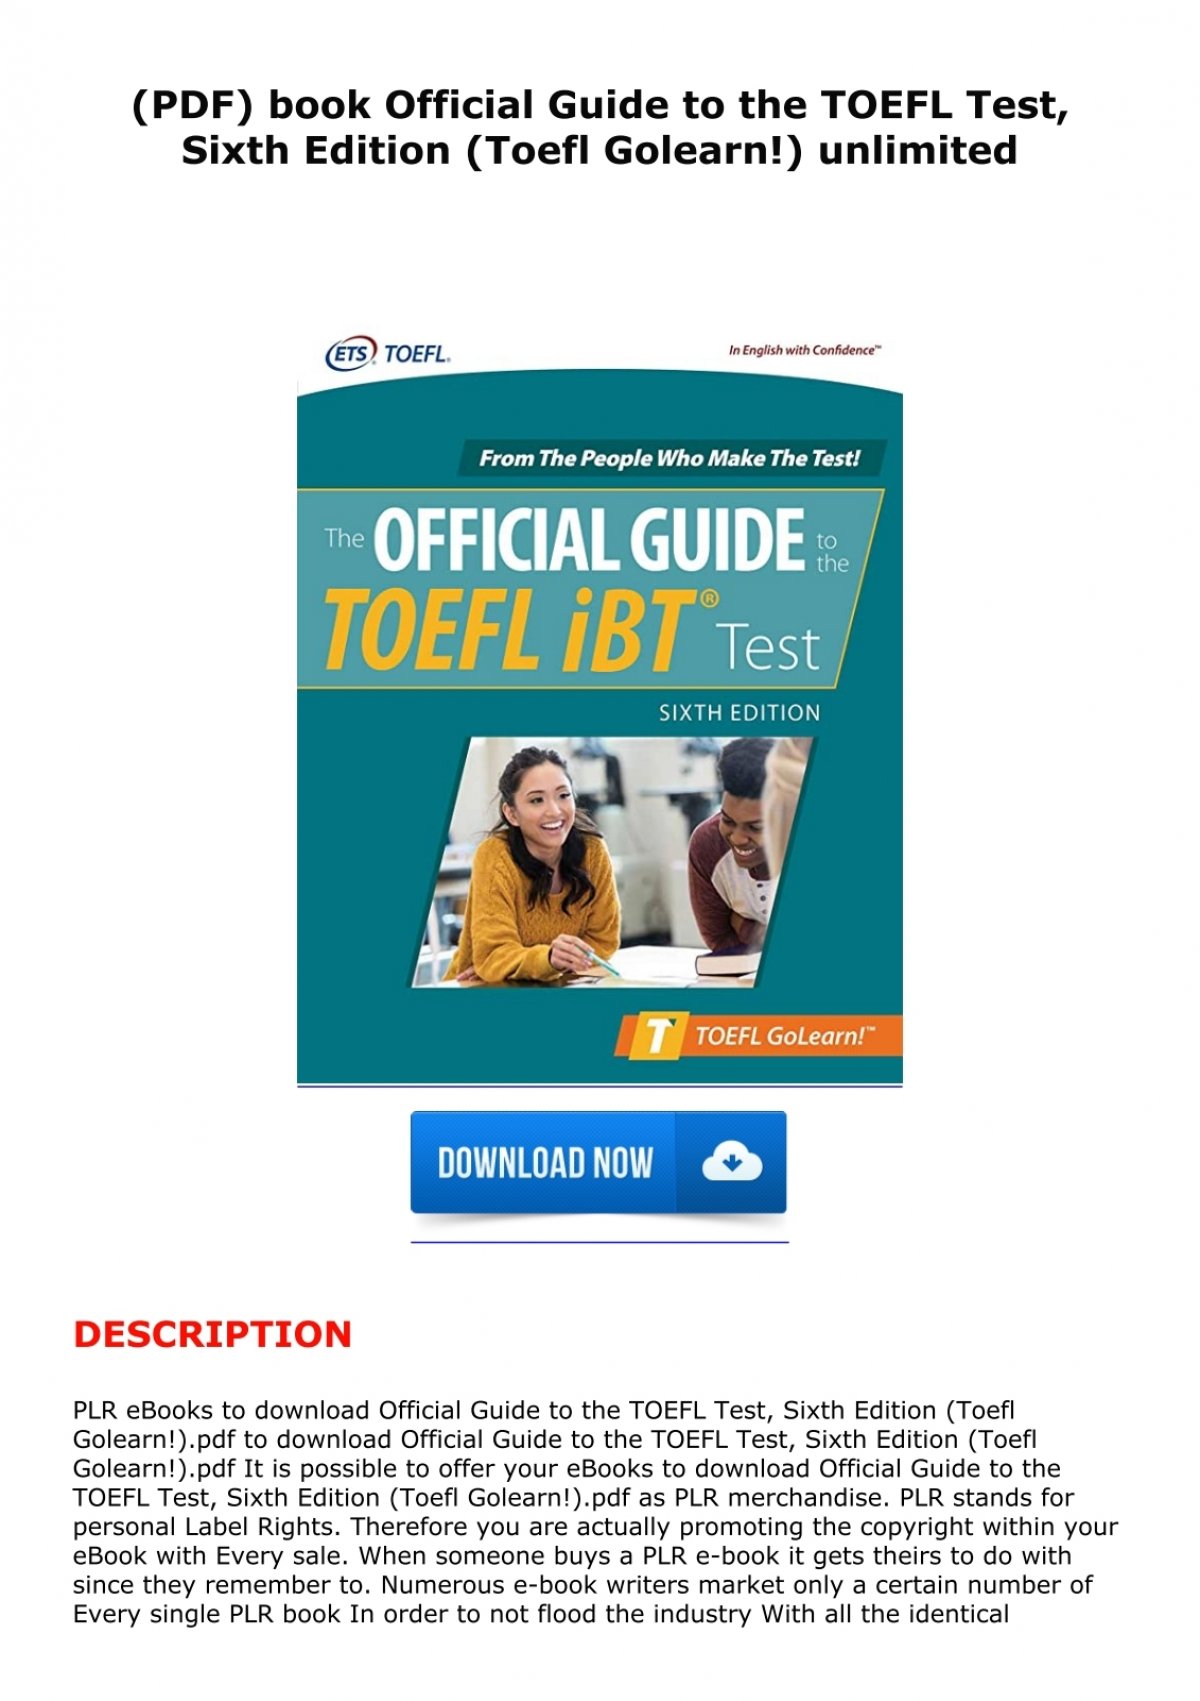 Pdf Book Official Guide To The Toefl Test Sixth Edition Toefl Golearn Unlimited 7909